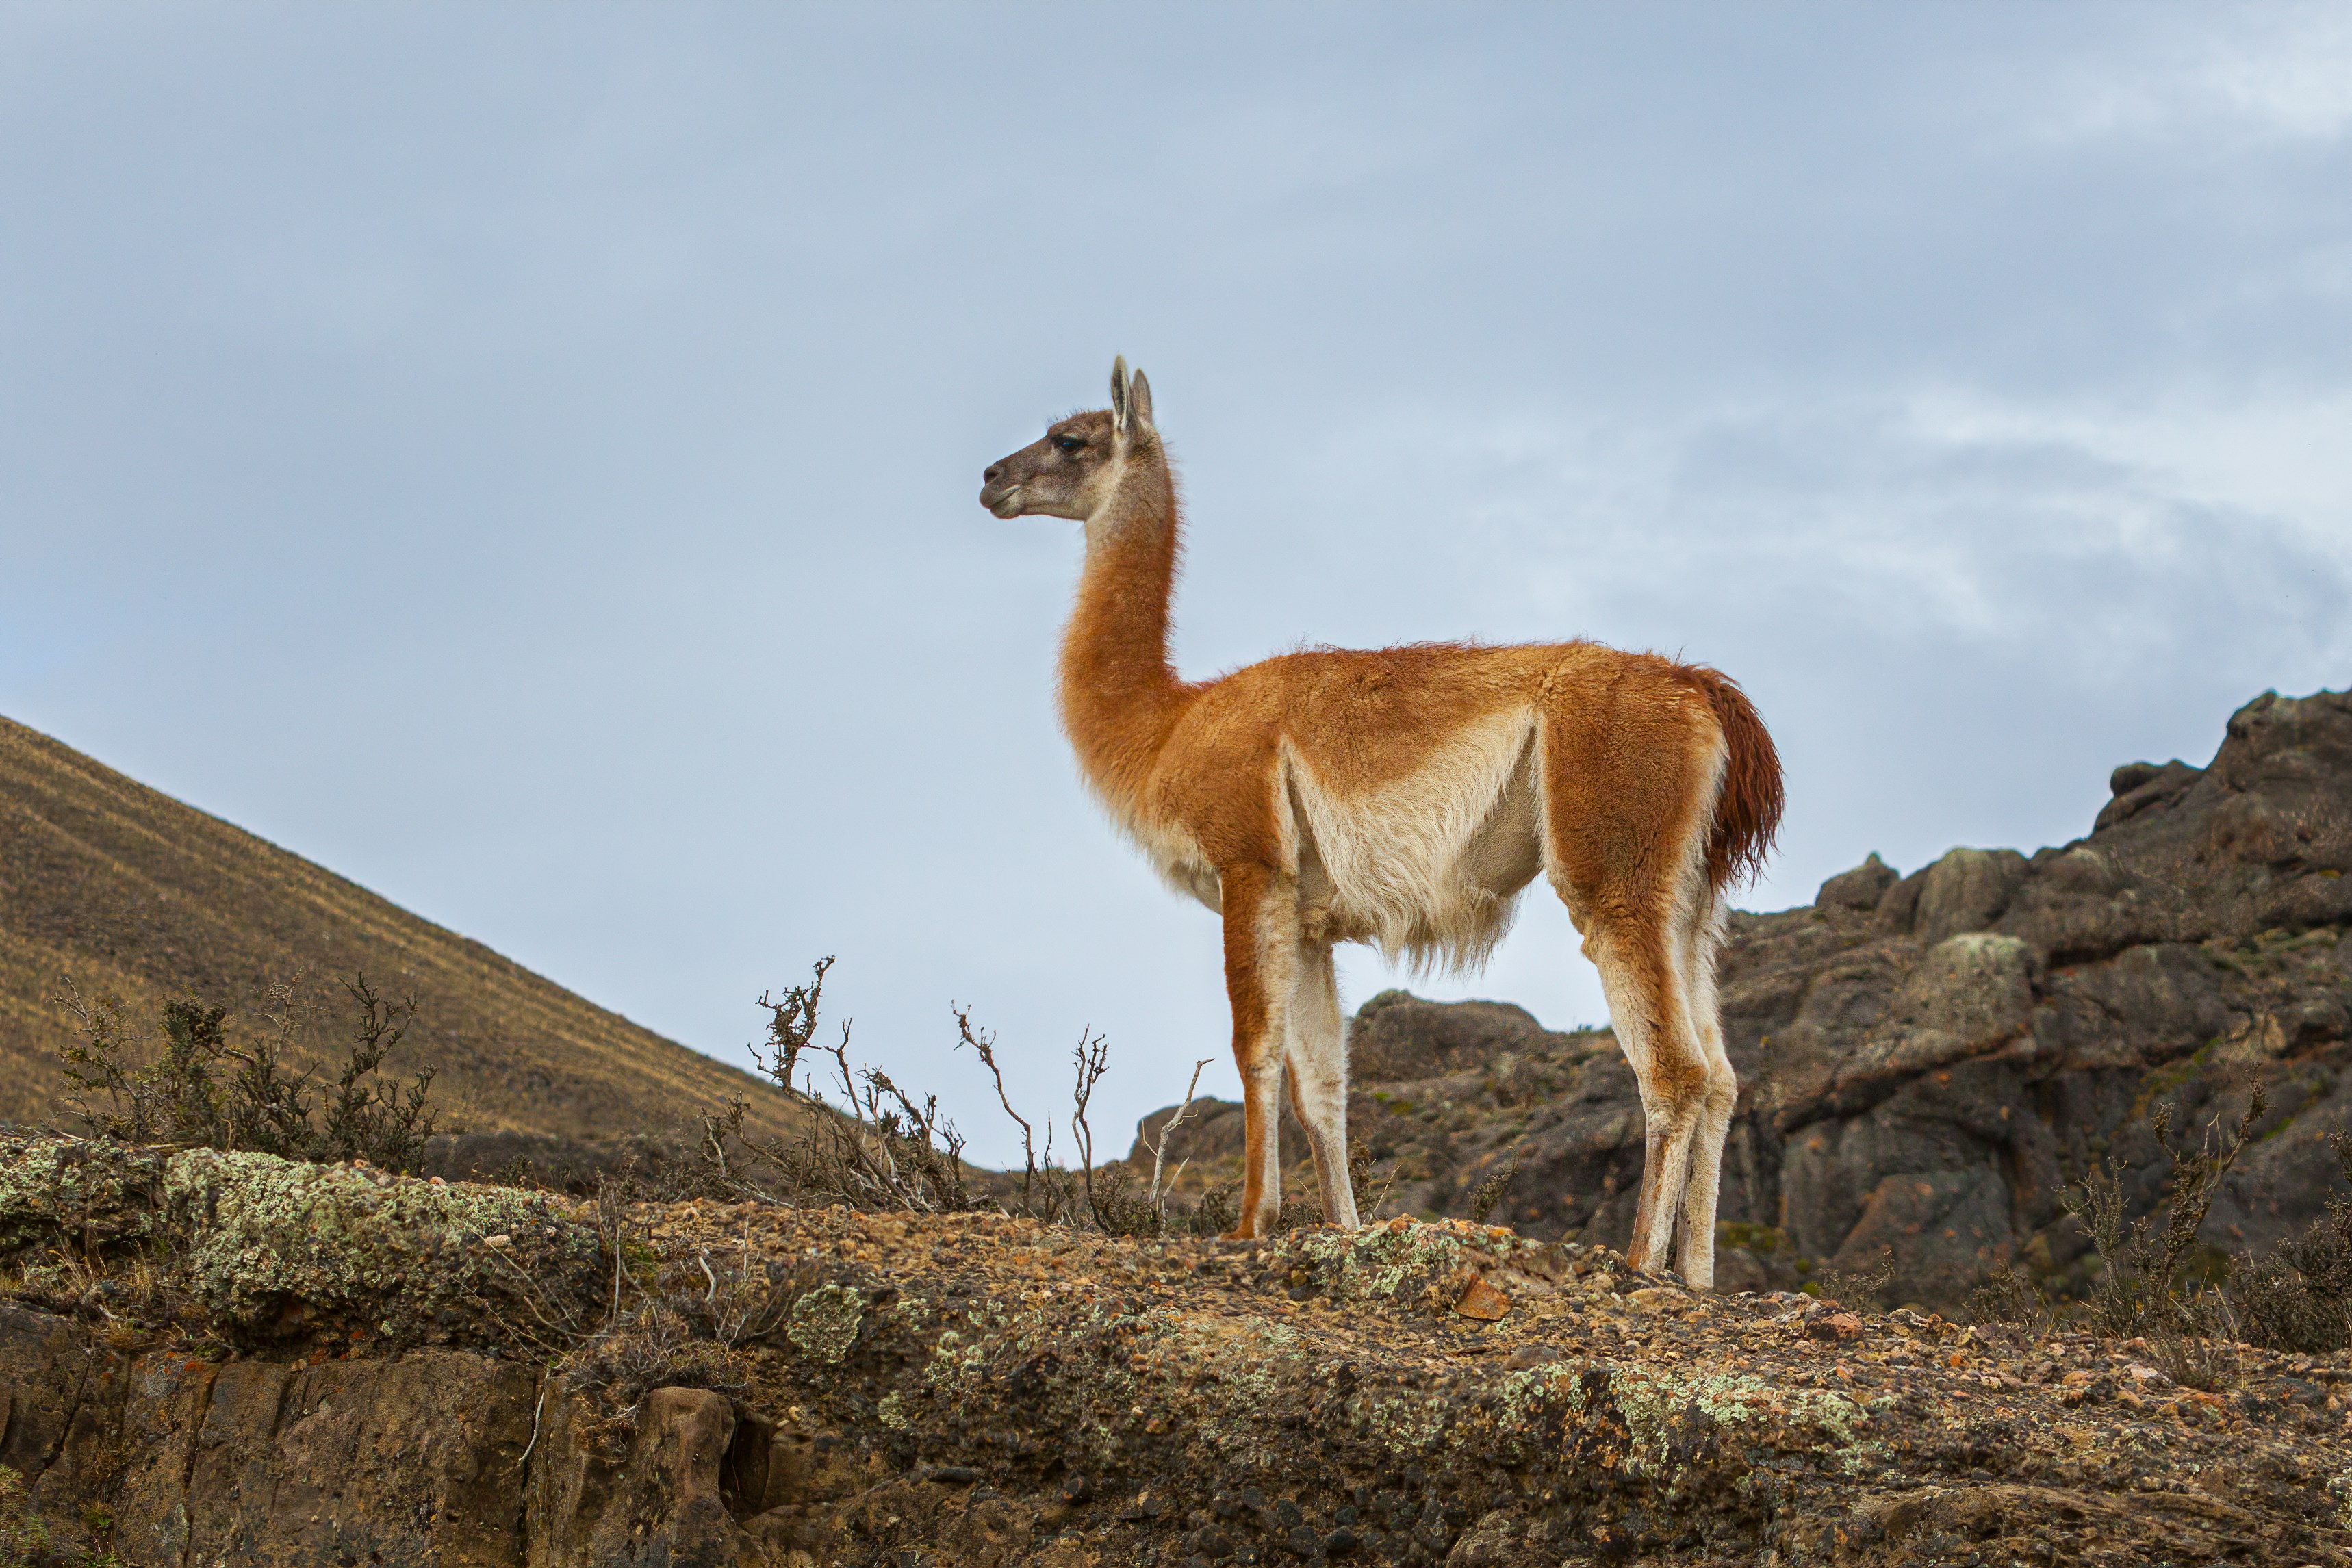 Guanaco standing on a hill against overcast sky